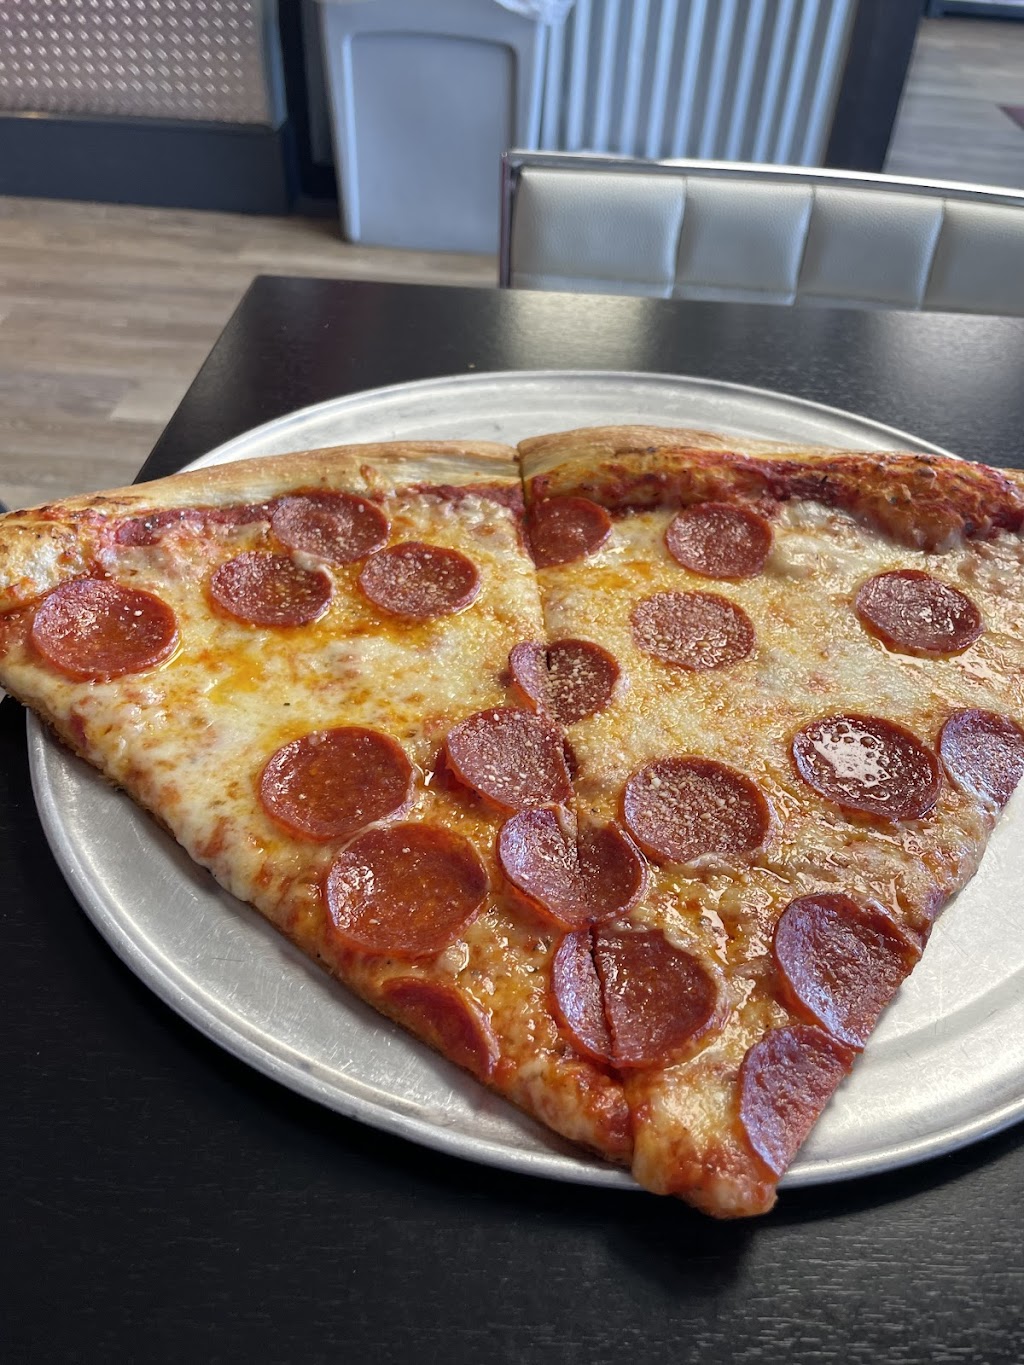 Jersey Giant Pizza | 13908 State Hwy 71, Bee Cave, TX 78738, USA | Phone: (512) 263-3535